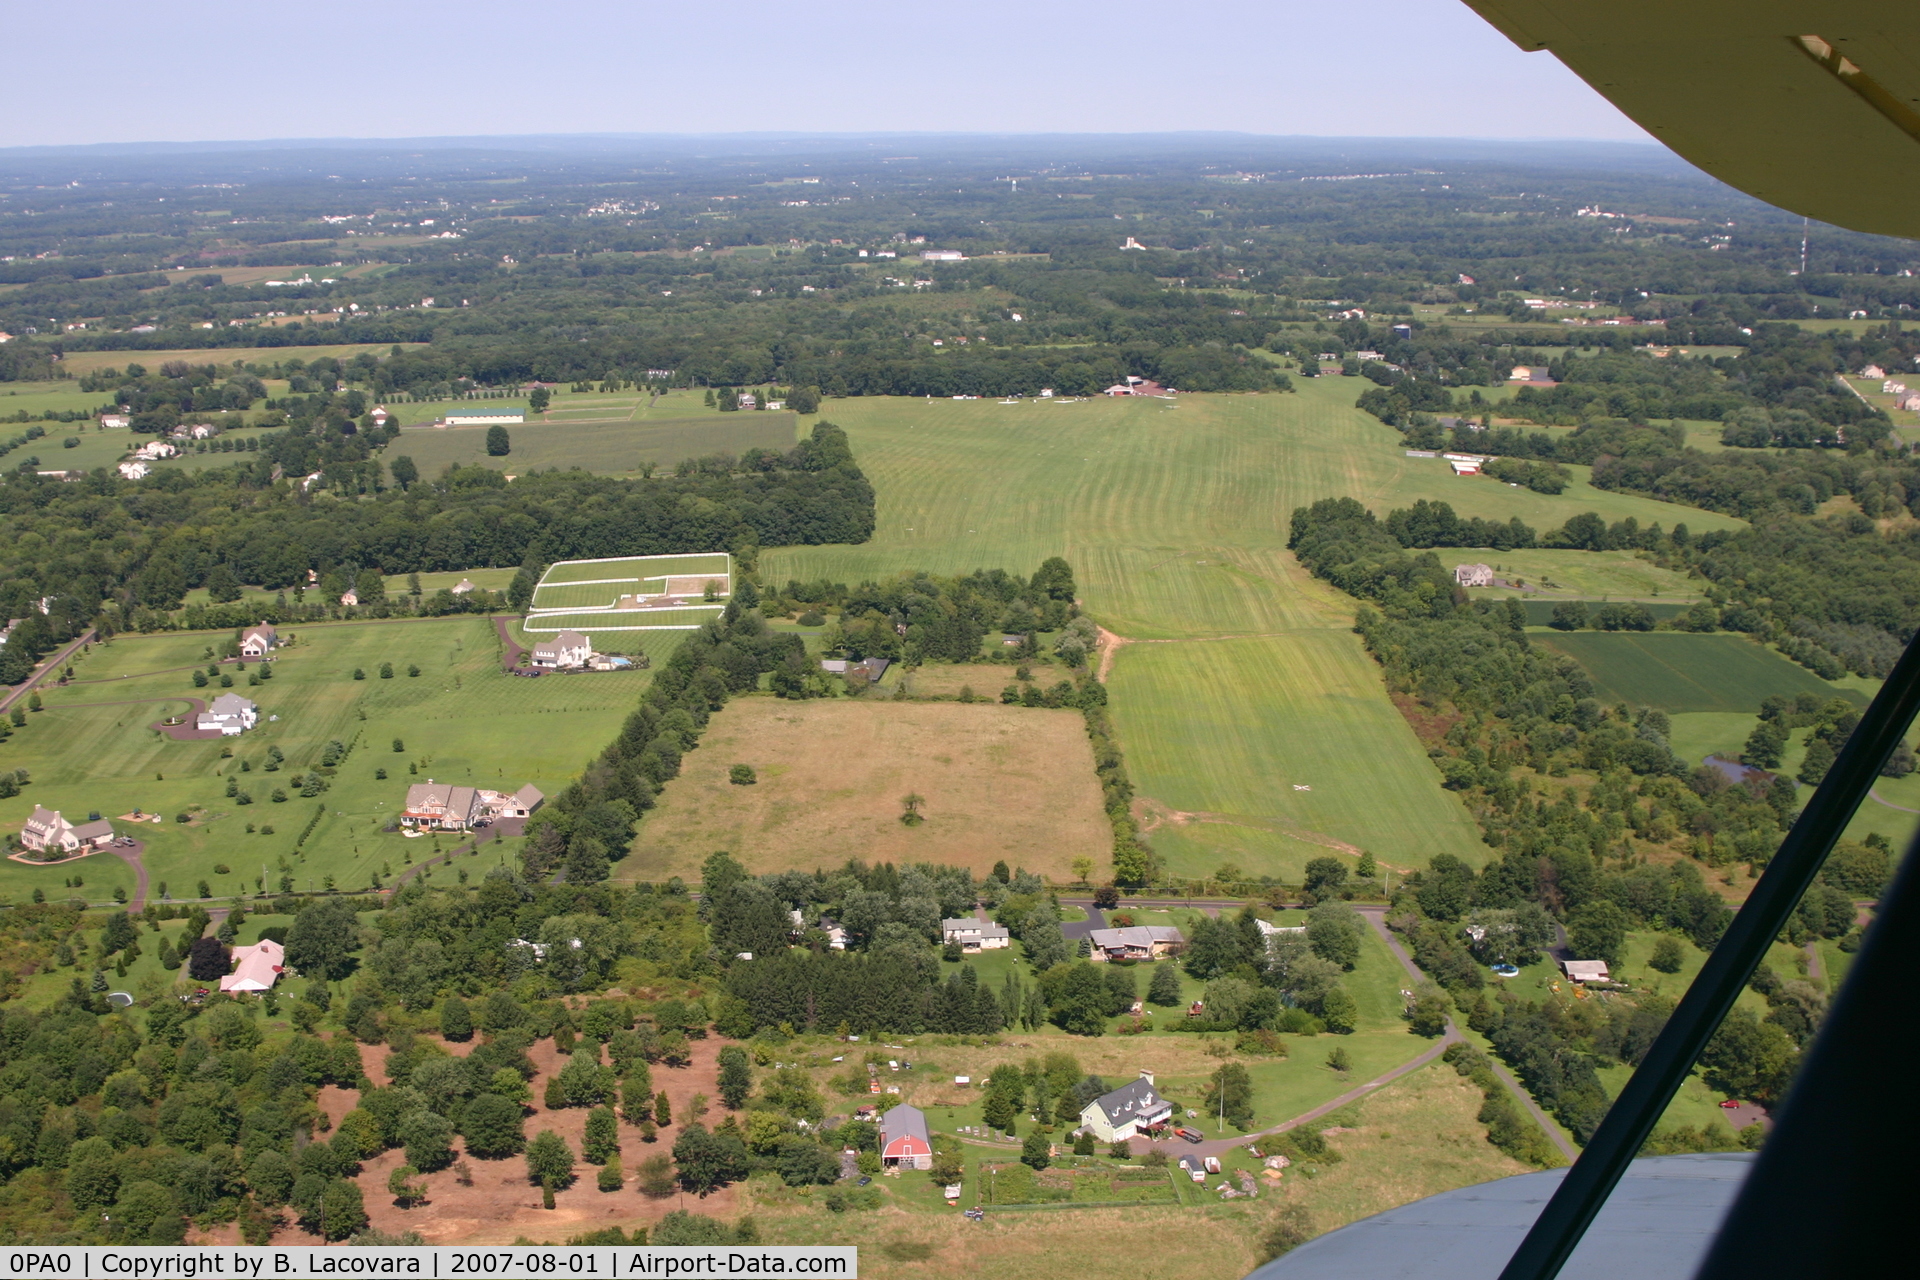 Philadelphia Gliderport (0PA0) - Home of Philadelphia Glider Council - Founded 1941